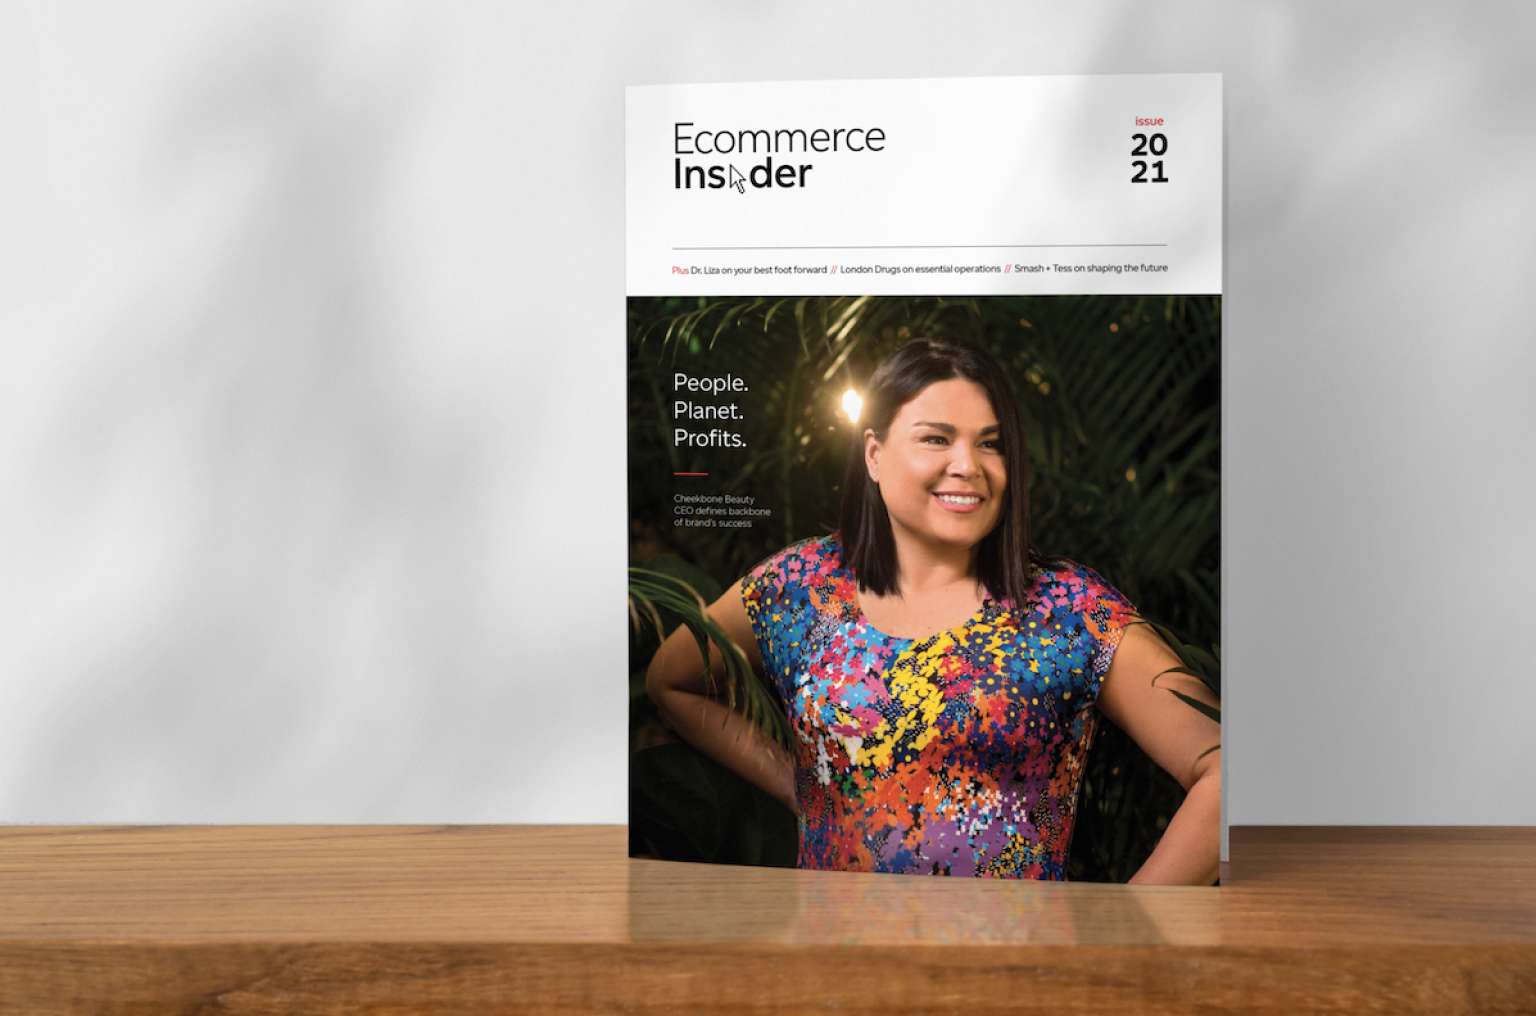 The cover of the 2021 edition of Ecommerce Insider magazine features Jen Harper of Cheekbone Beauty